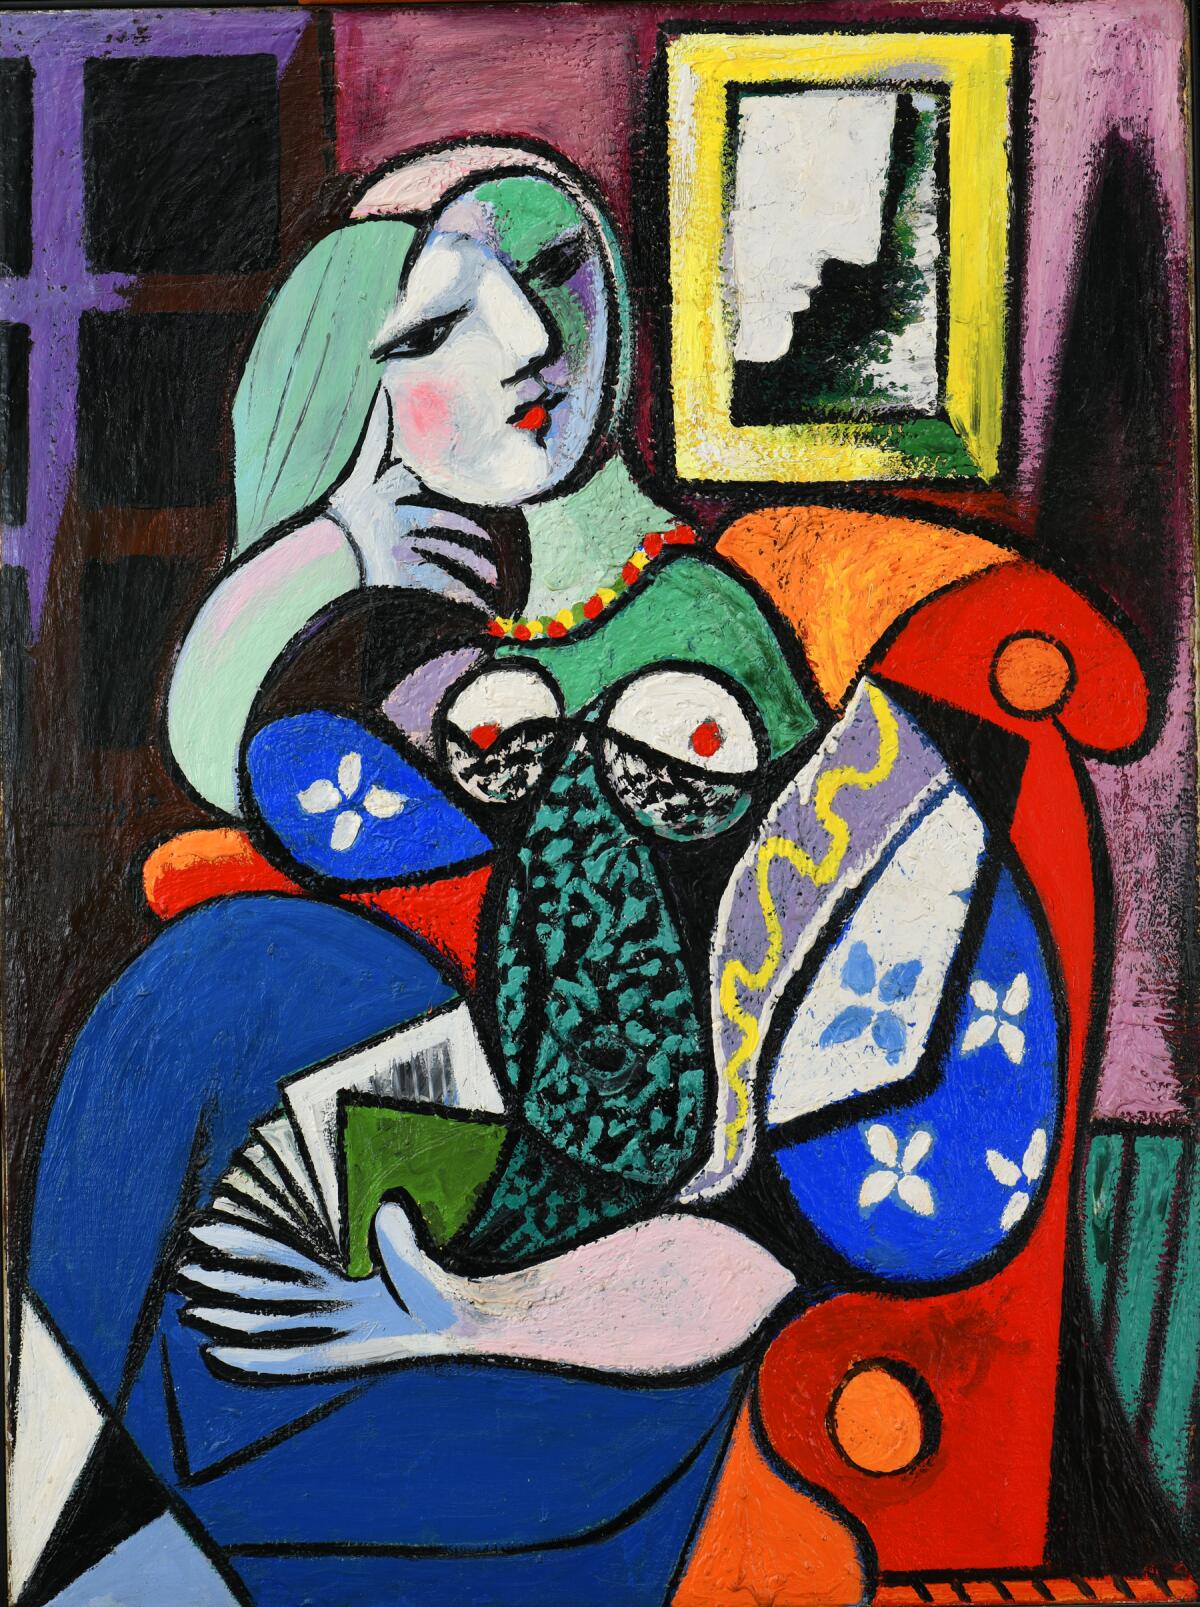 An abstract painting of a woman with a book.